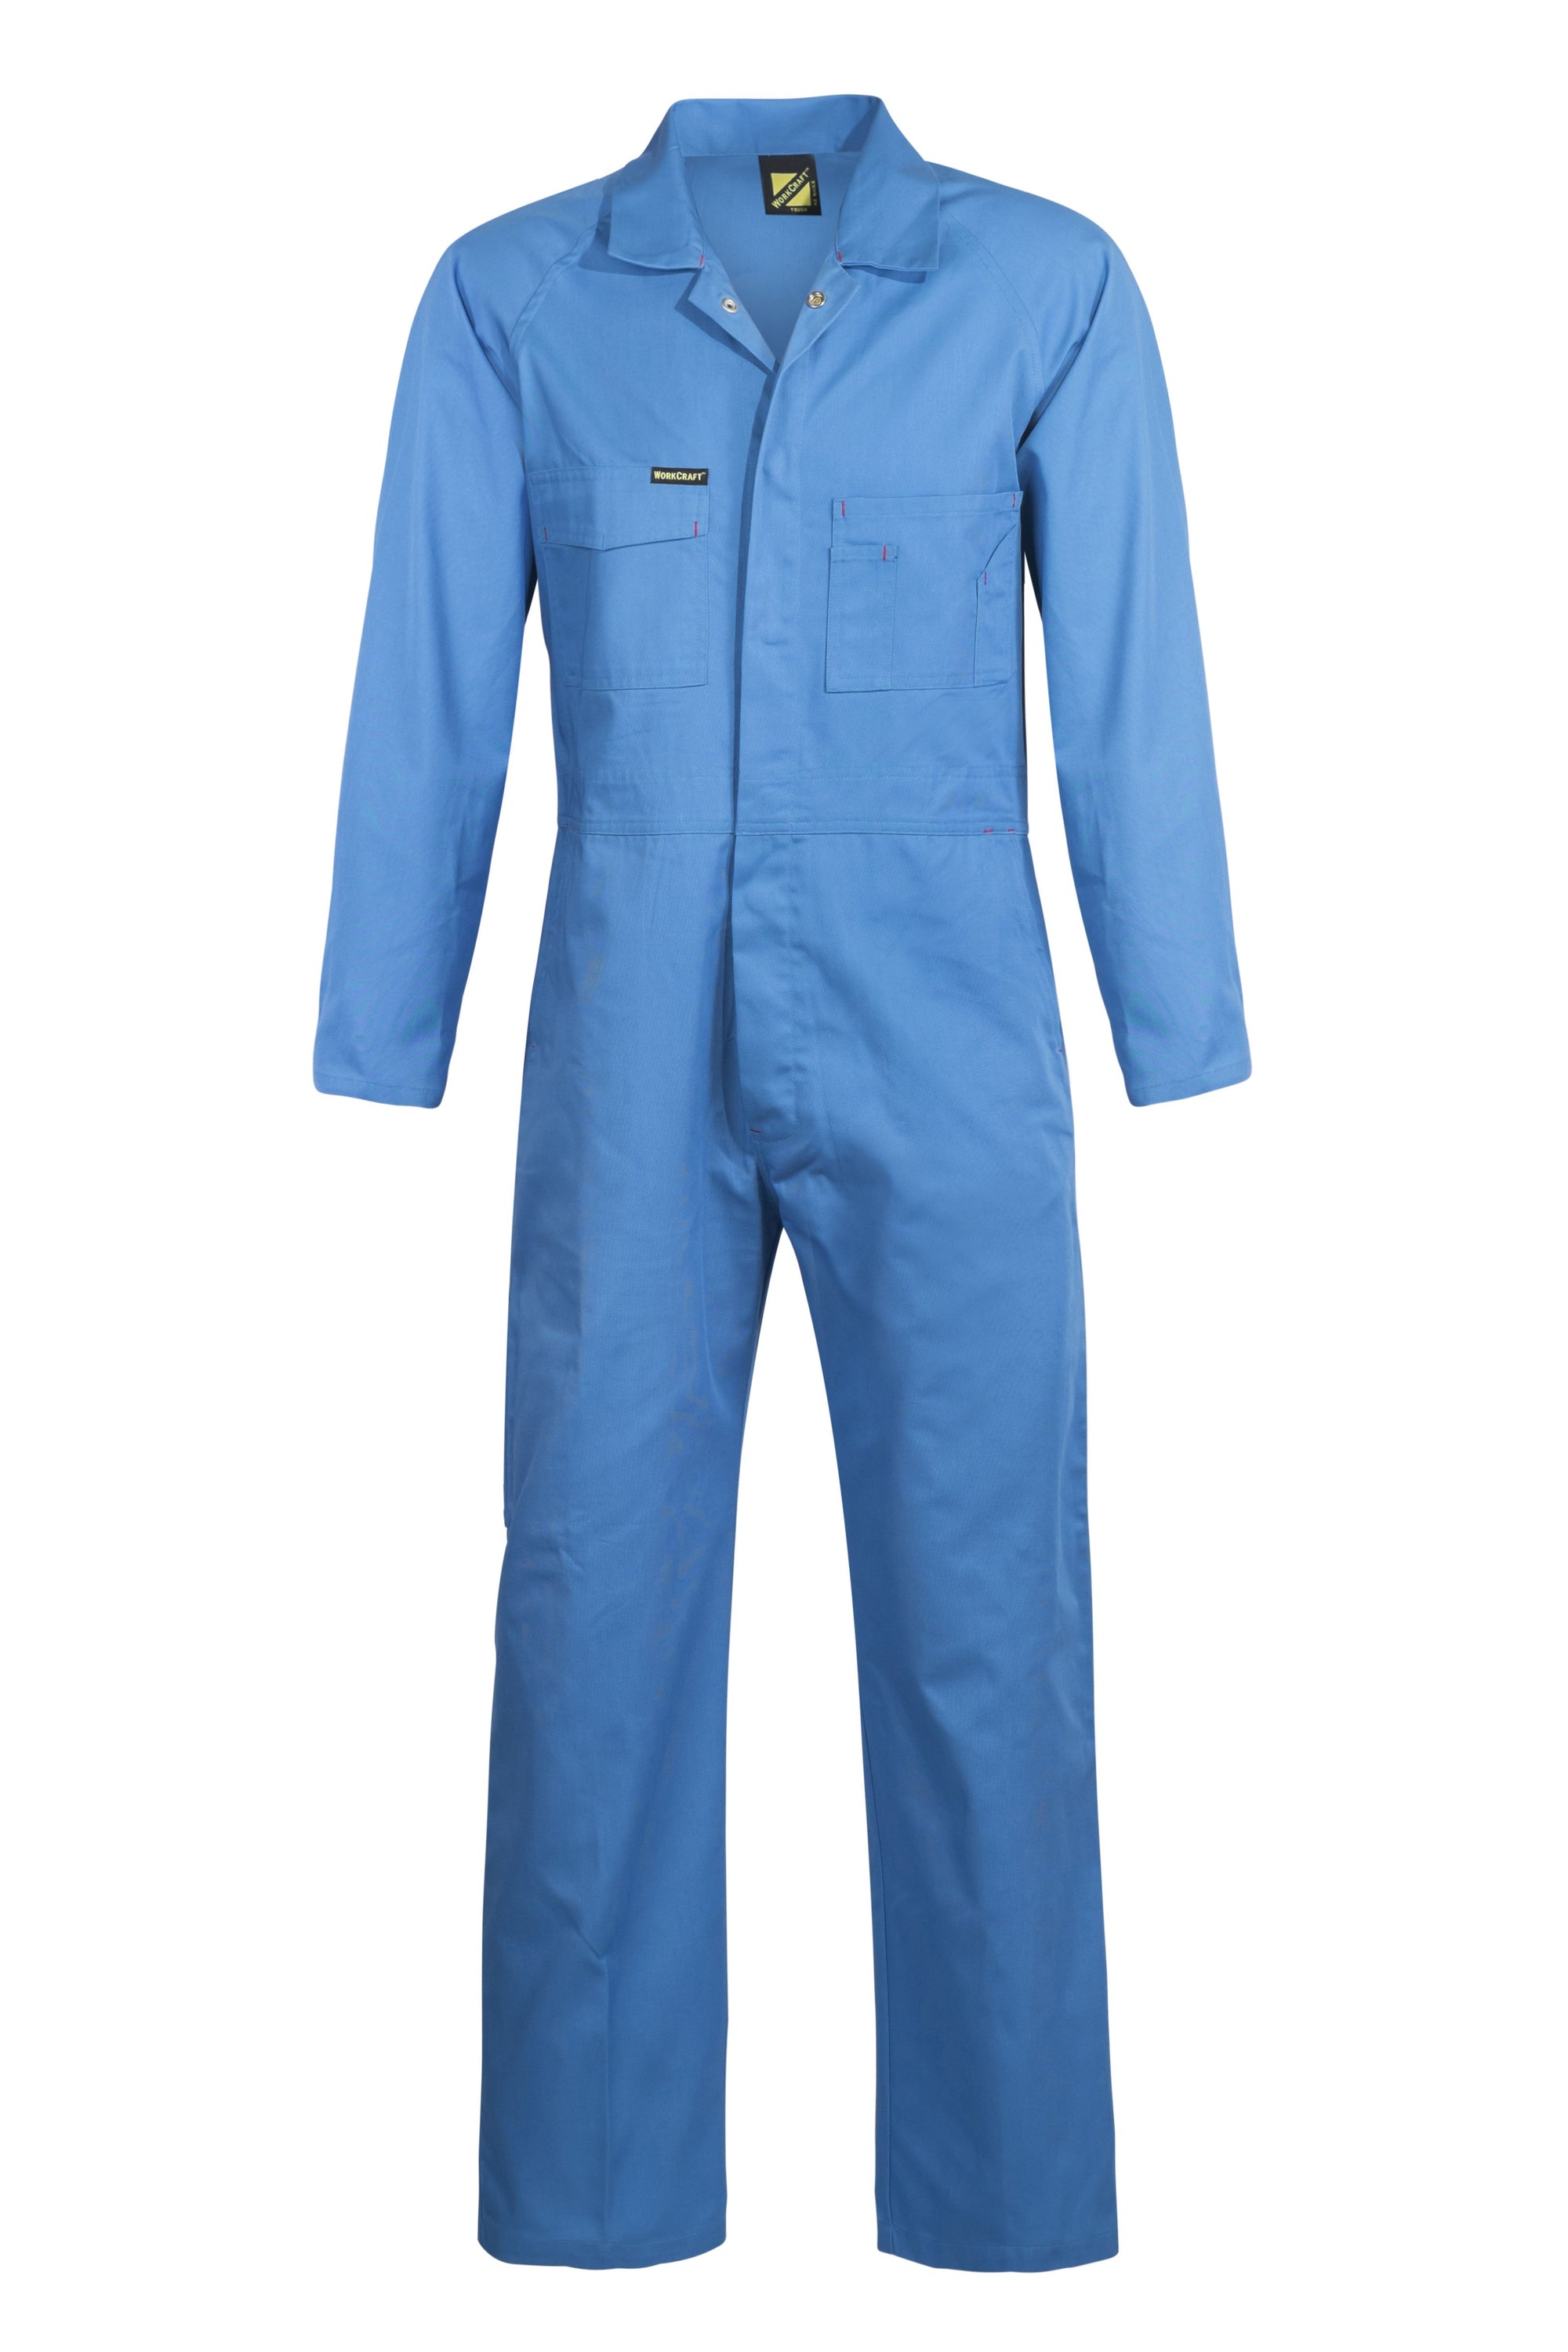 WorkCraft Mens Navy Poly/Cotton Coveralls 220g 87R